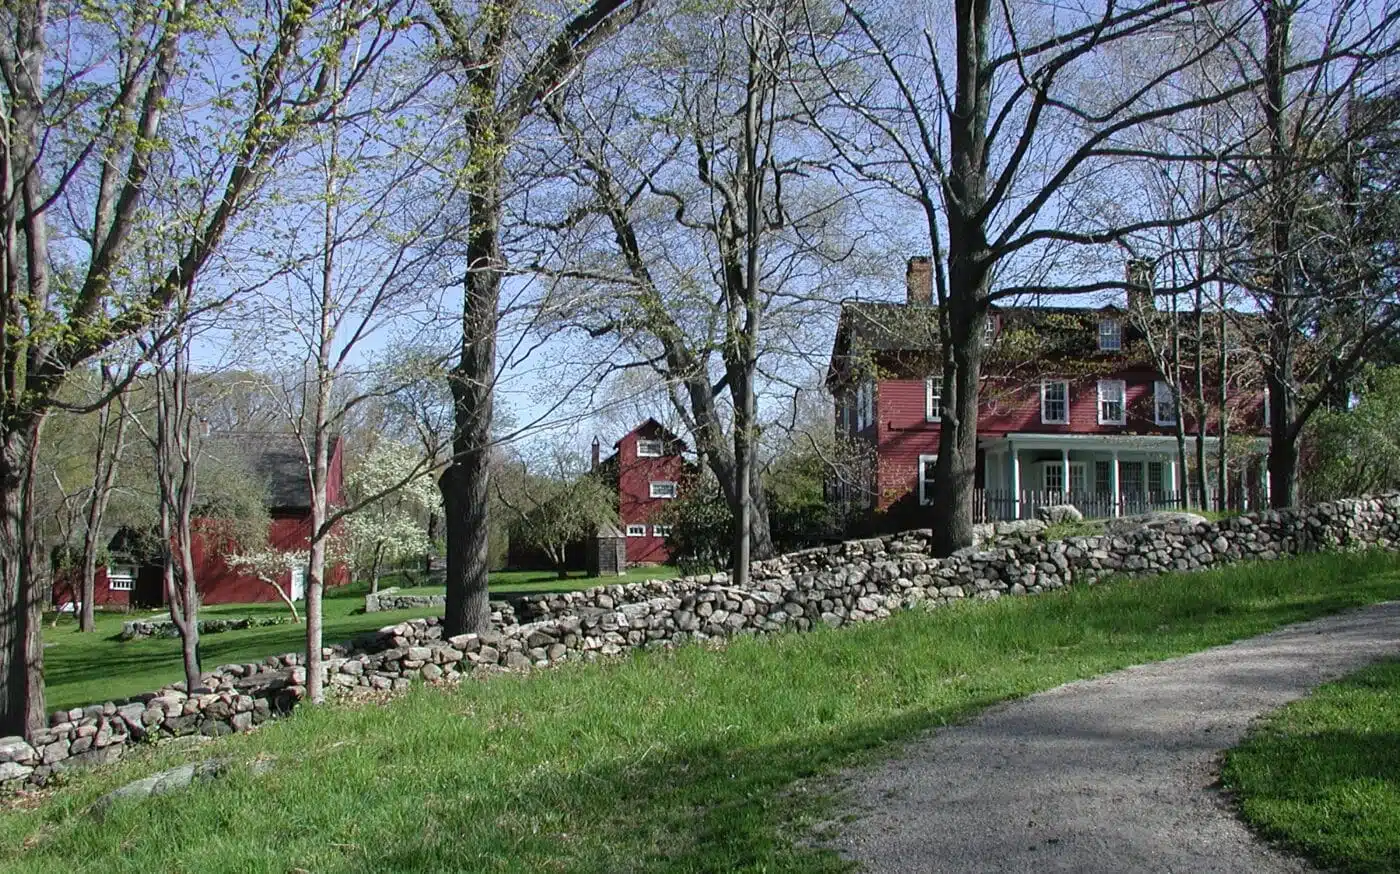 A red house and buildings behind a stone wall and some trees.